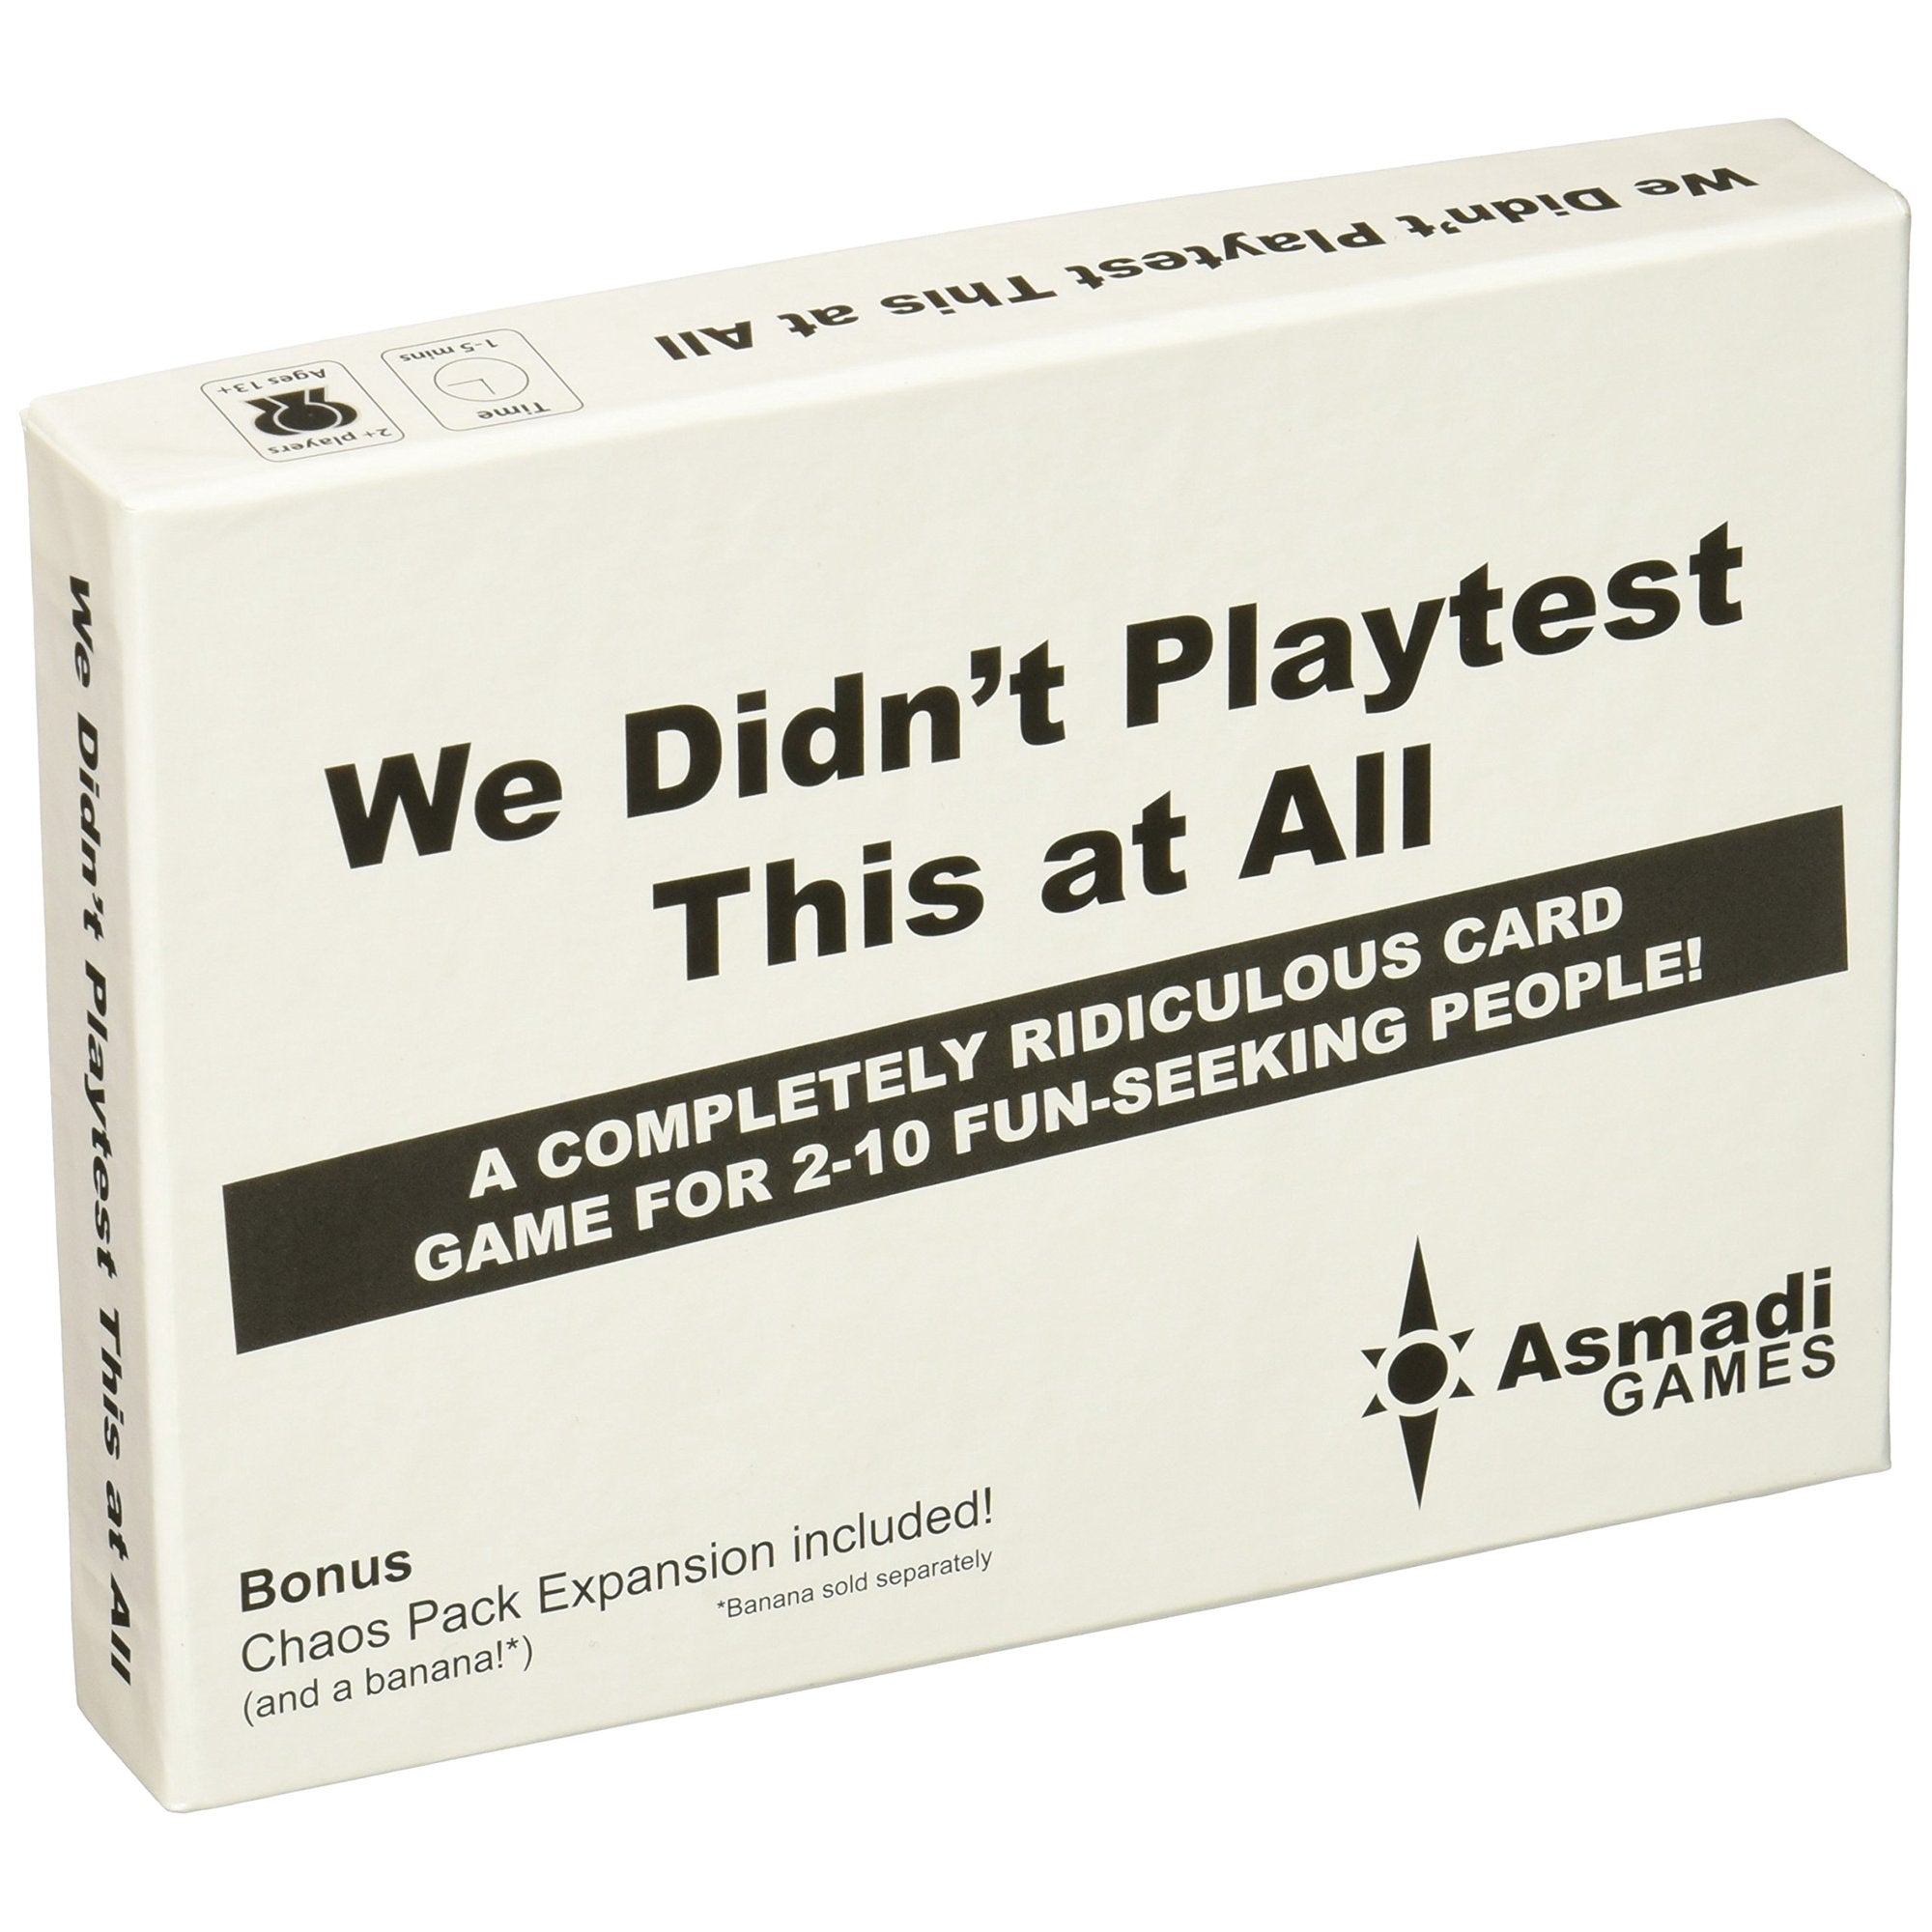 We Didn't Playtest This At All | L.A. Mood Comics and Games